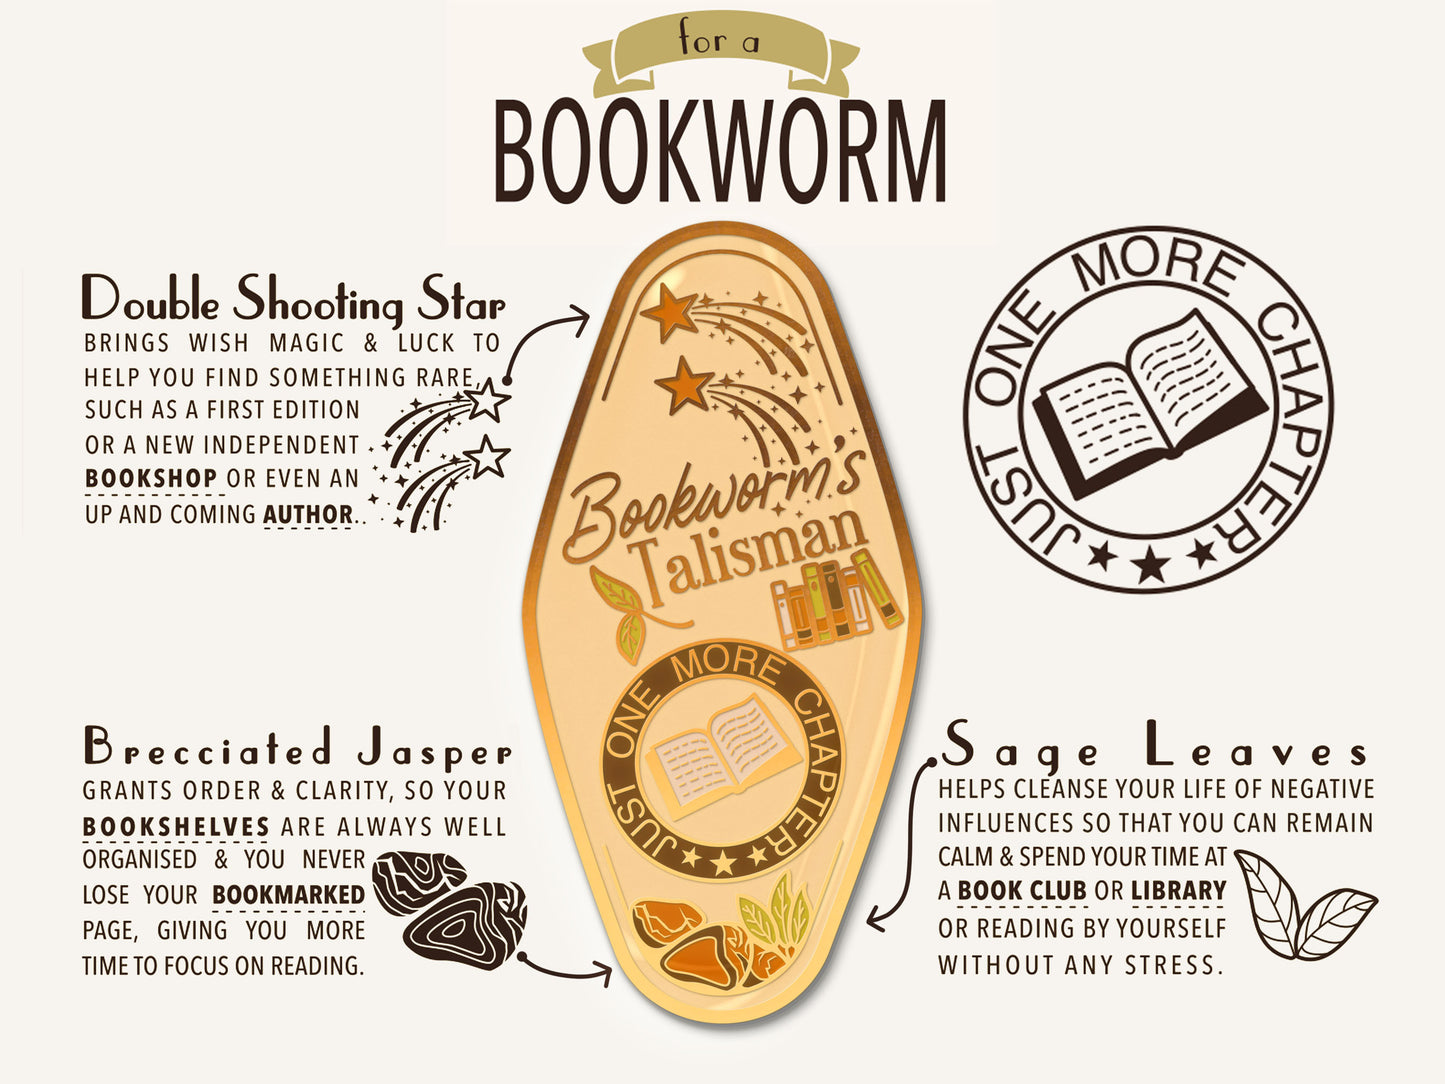 A illustrated diagram outline the symbolism of the different design elements of the for a Bookworm Talisman pin. Information includes the meaning of the double shooting star, brecciated Jasper and the sage leaves.